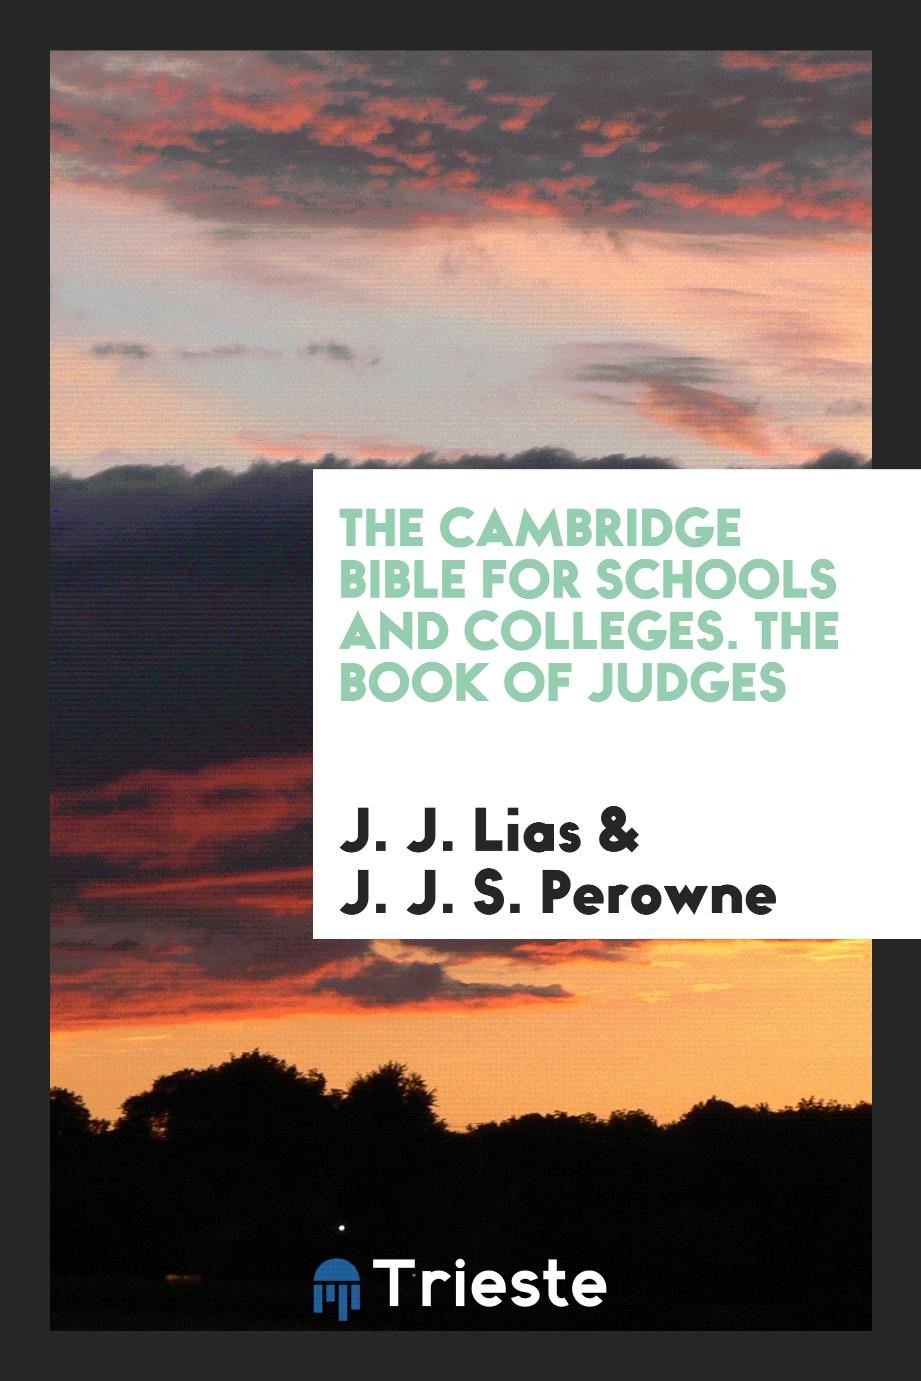 The Cambridge Bible for Schools and Colleges. The Book of Judges